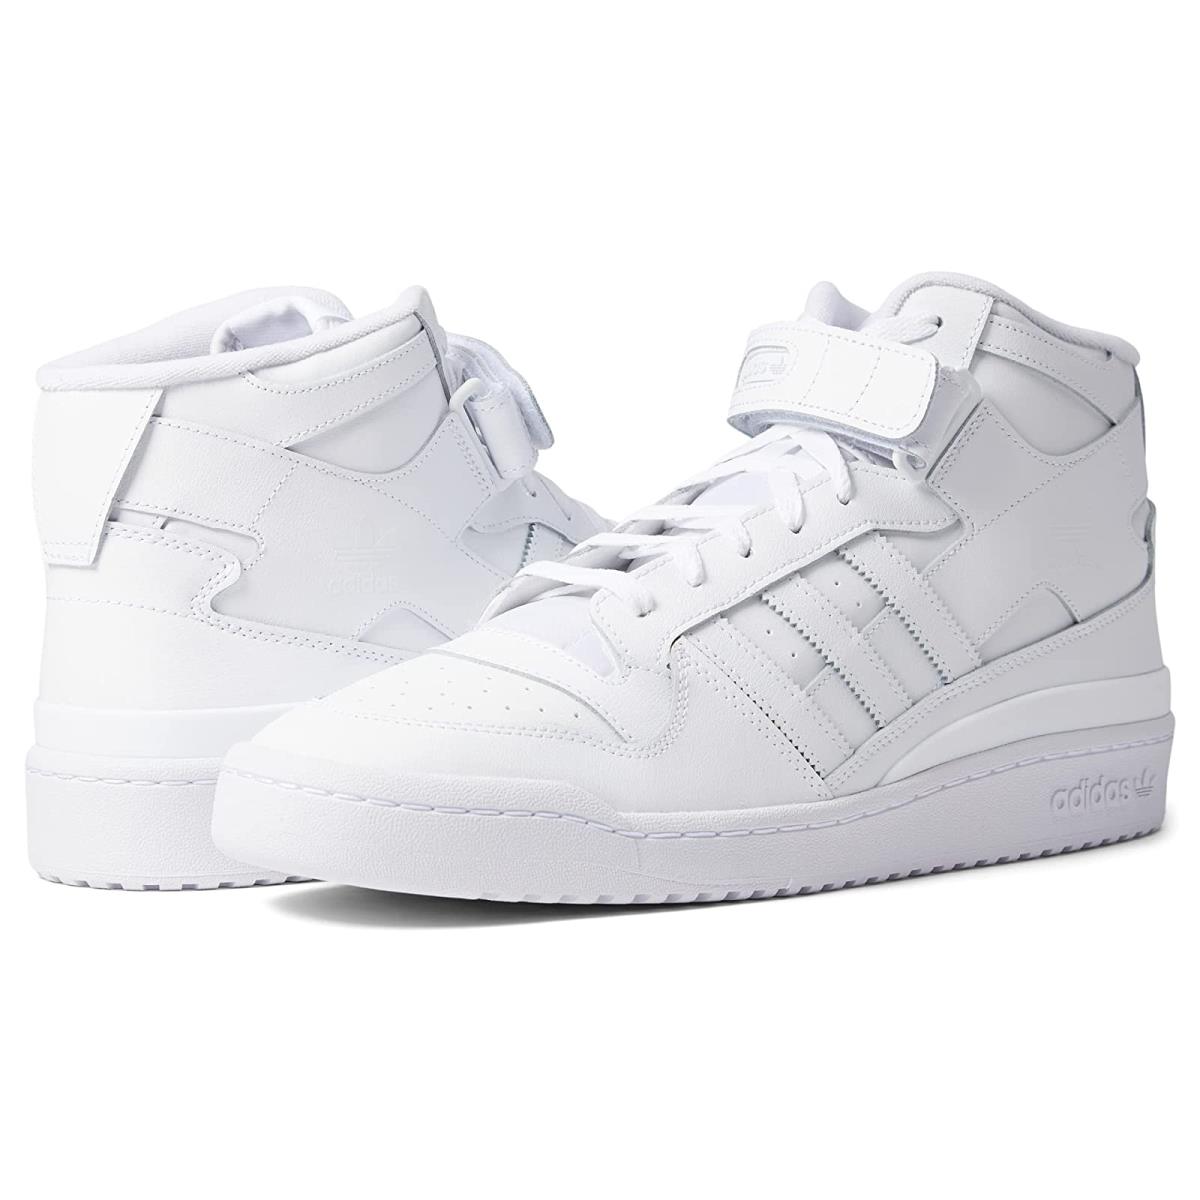 Man`s Sneakers Athletic Shoes Adidas Originals Forum Mid Footwear White/Footwear White/Footwear White